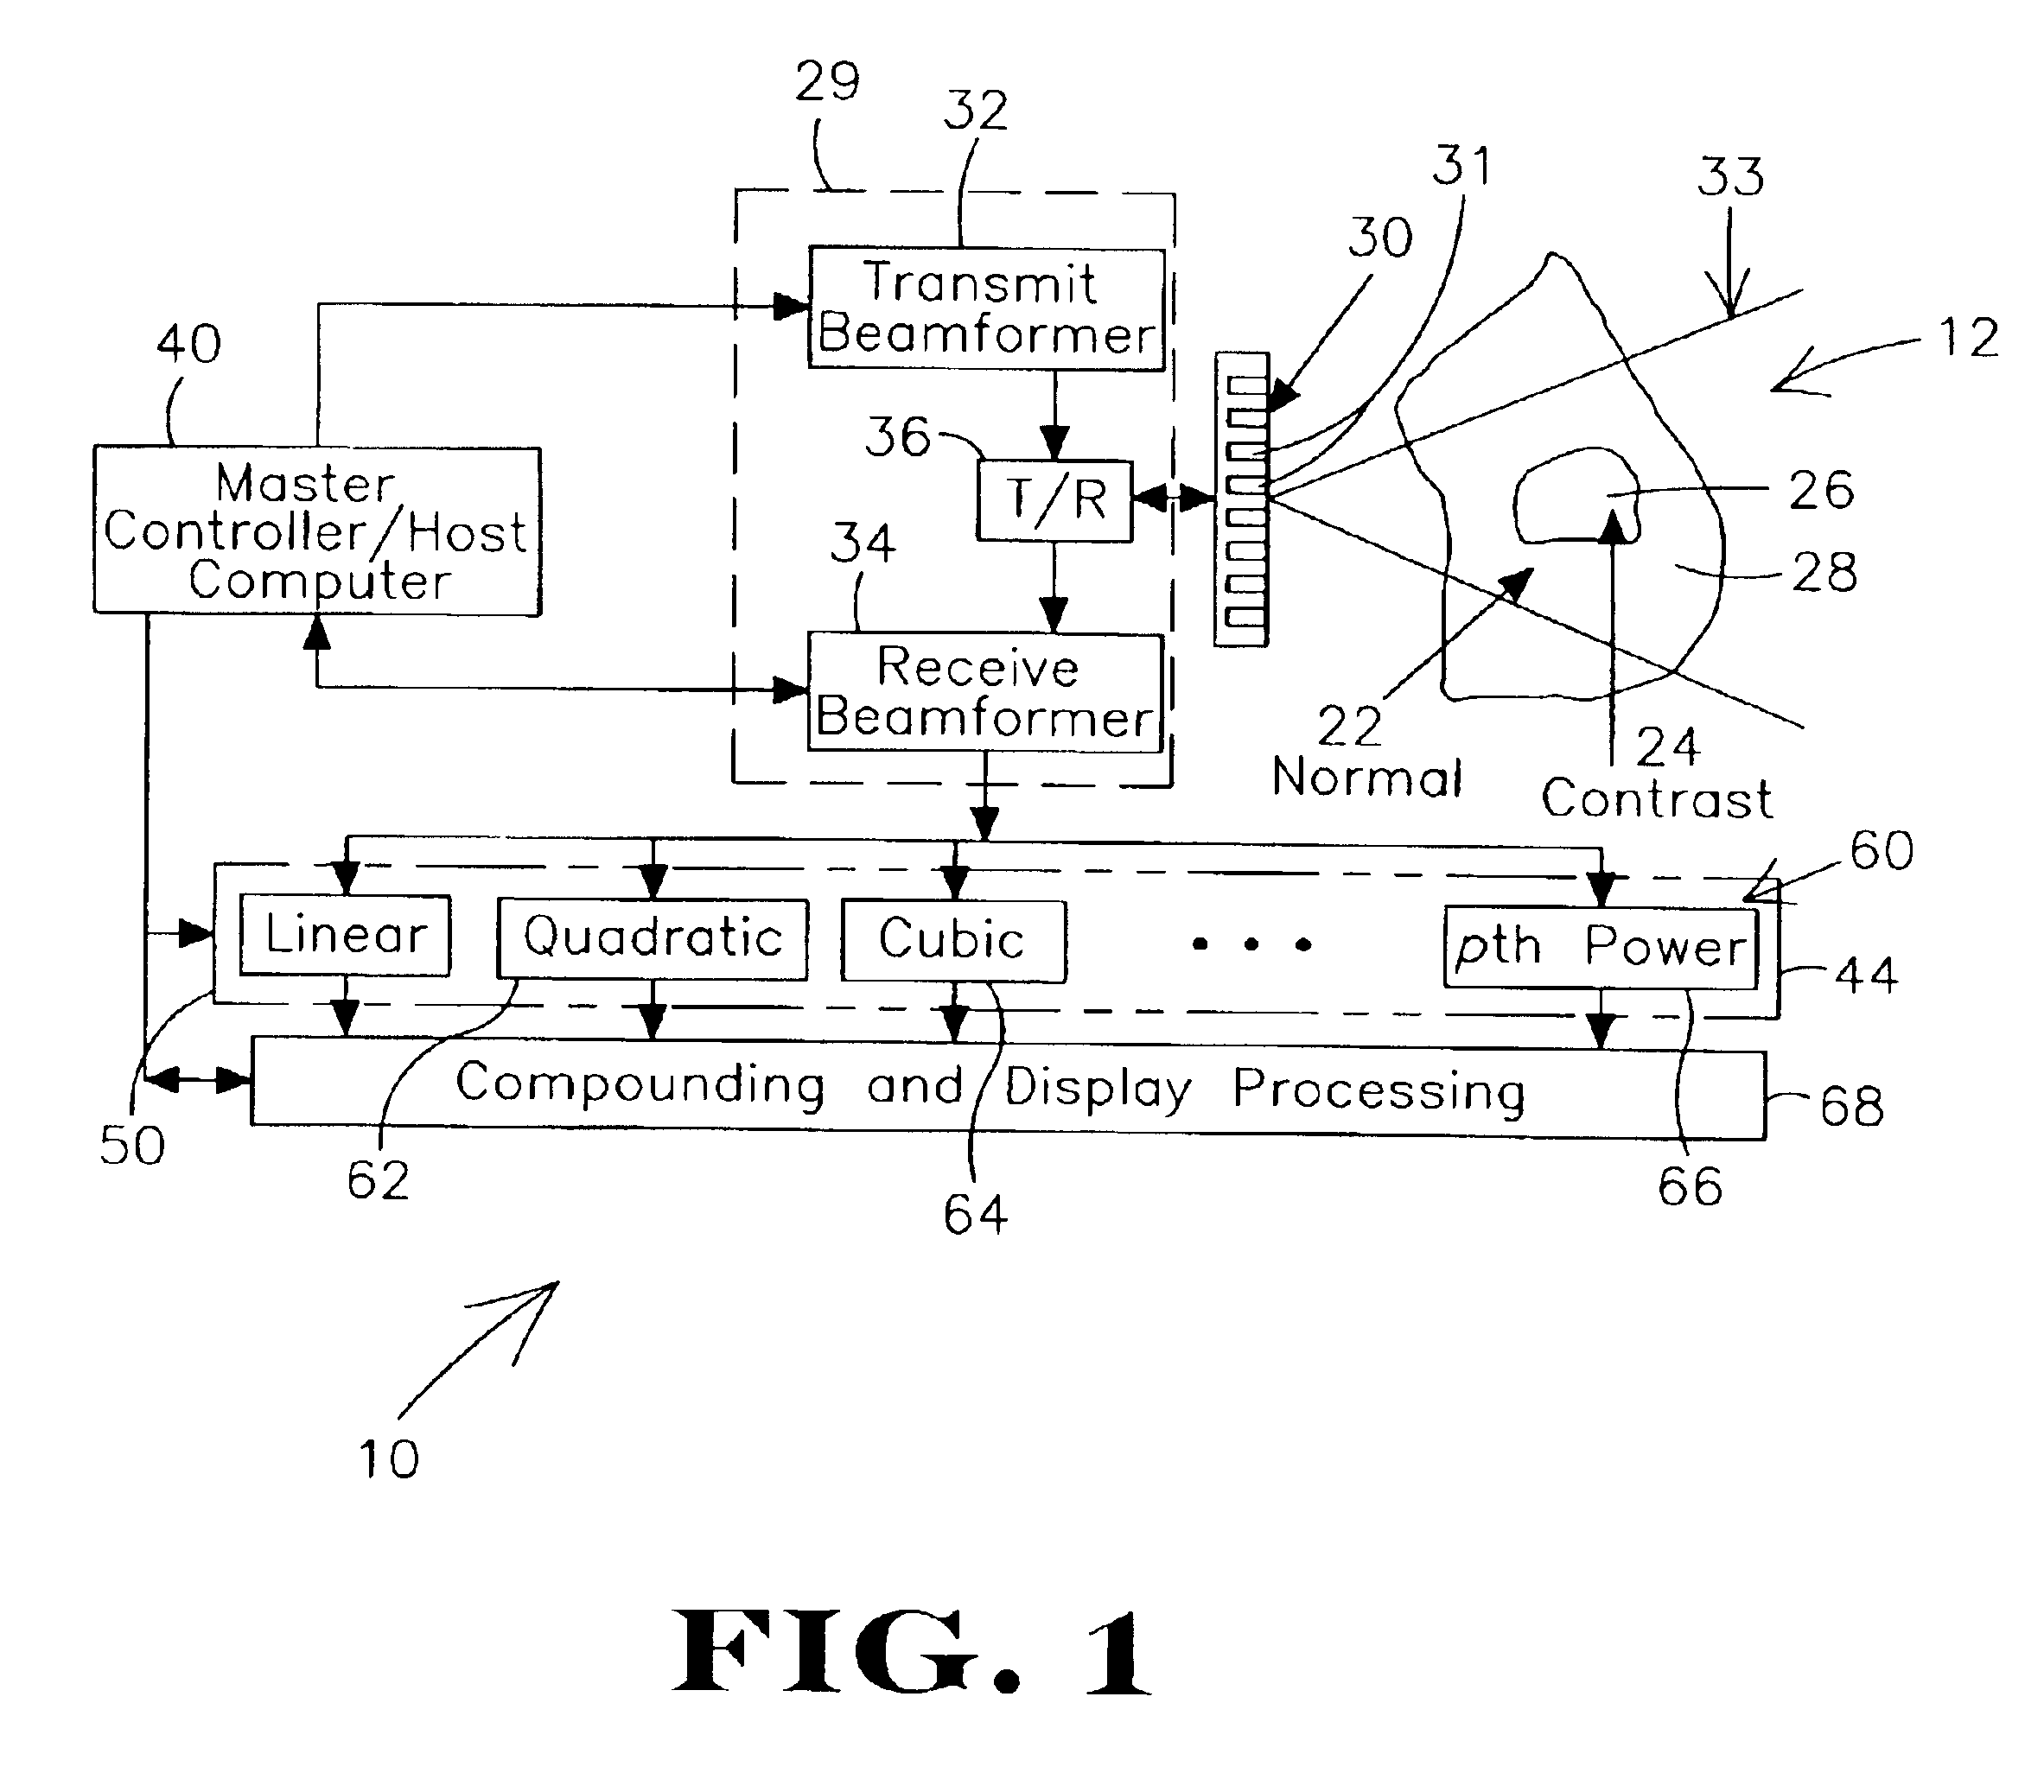 Ultrasound imaging system and method using non-linear post-beamforming filter